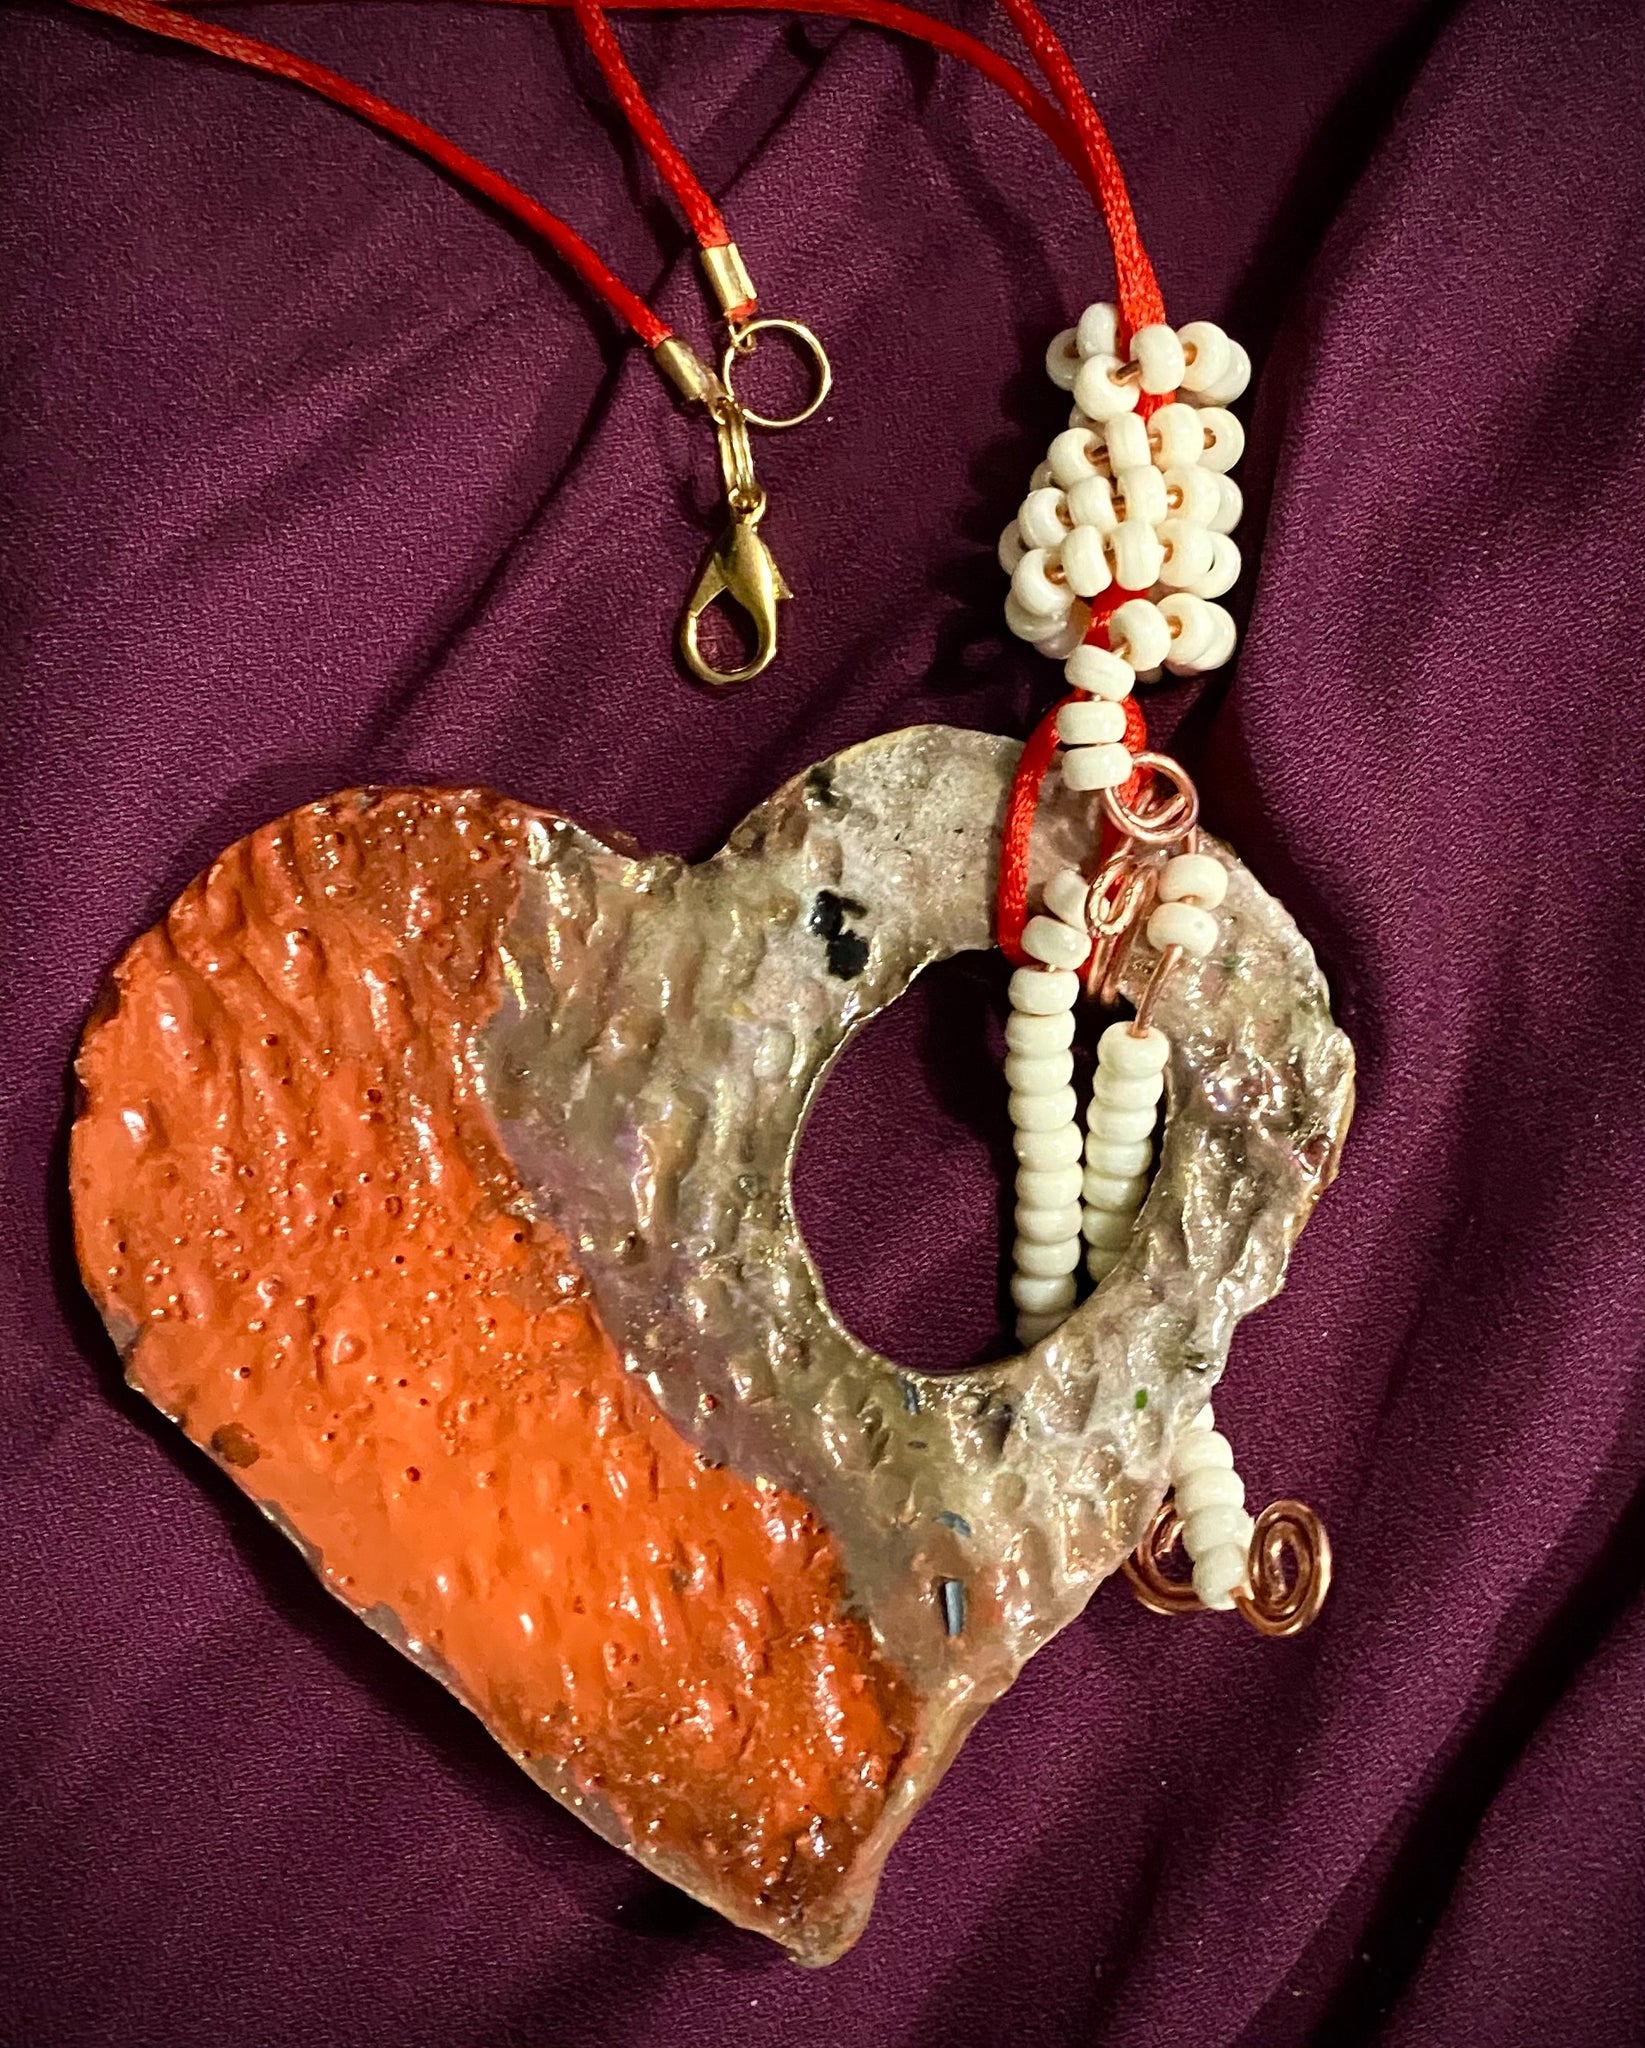 Have A Heart! Each heart pendant is handmade with love! It is 3"x 3"and weighs approx. 3ozs. This pendant has a red,orange, white and copper metallic raku glazes that renders a unique translucent  patina. The heart has a textured pattern . Both sides are  are different and equally beautiful! There is a spiral white mini beads on copper in the center. This pendant has a nice 12" red adjustable rattail cord!